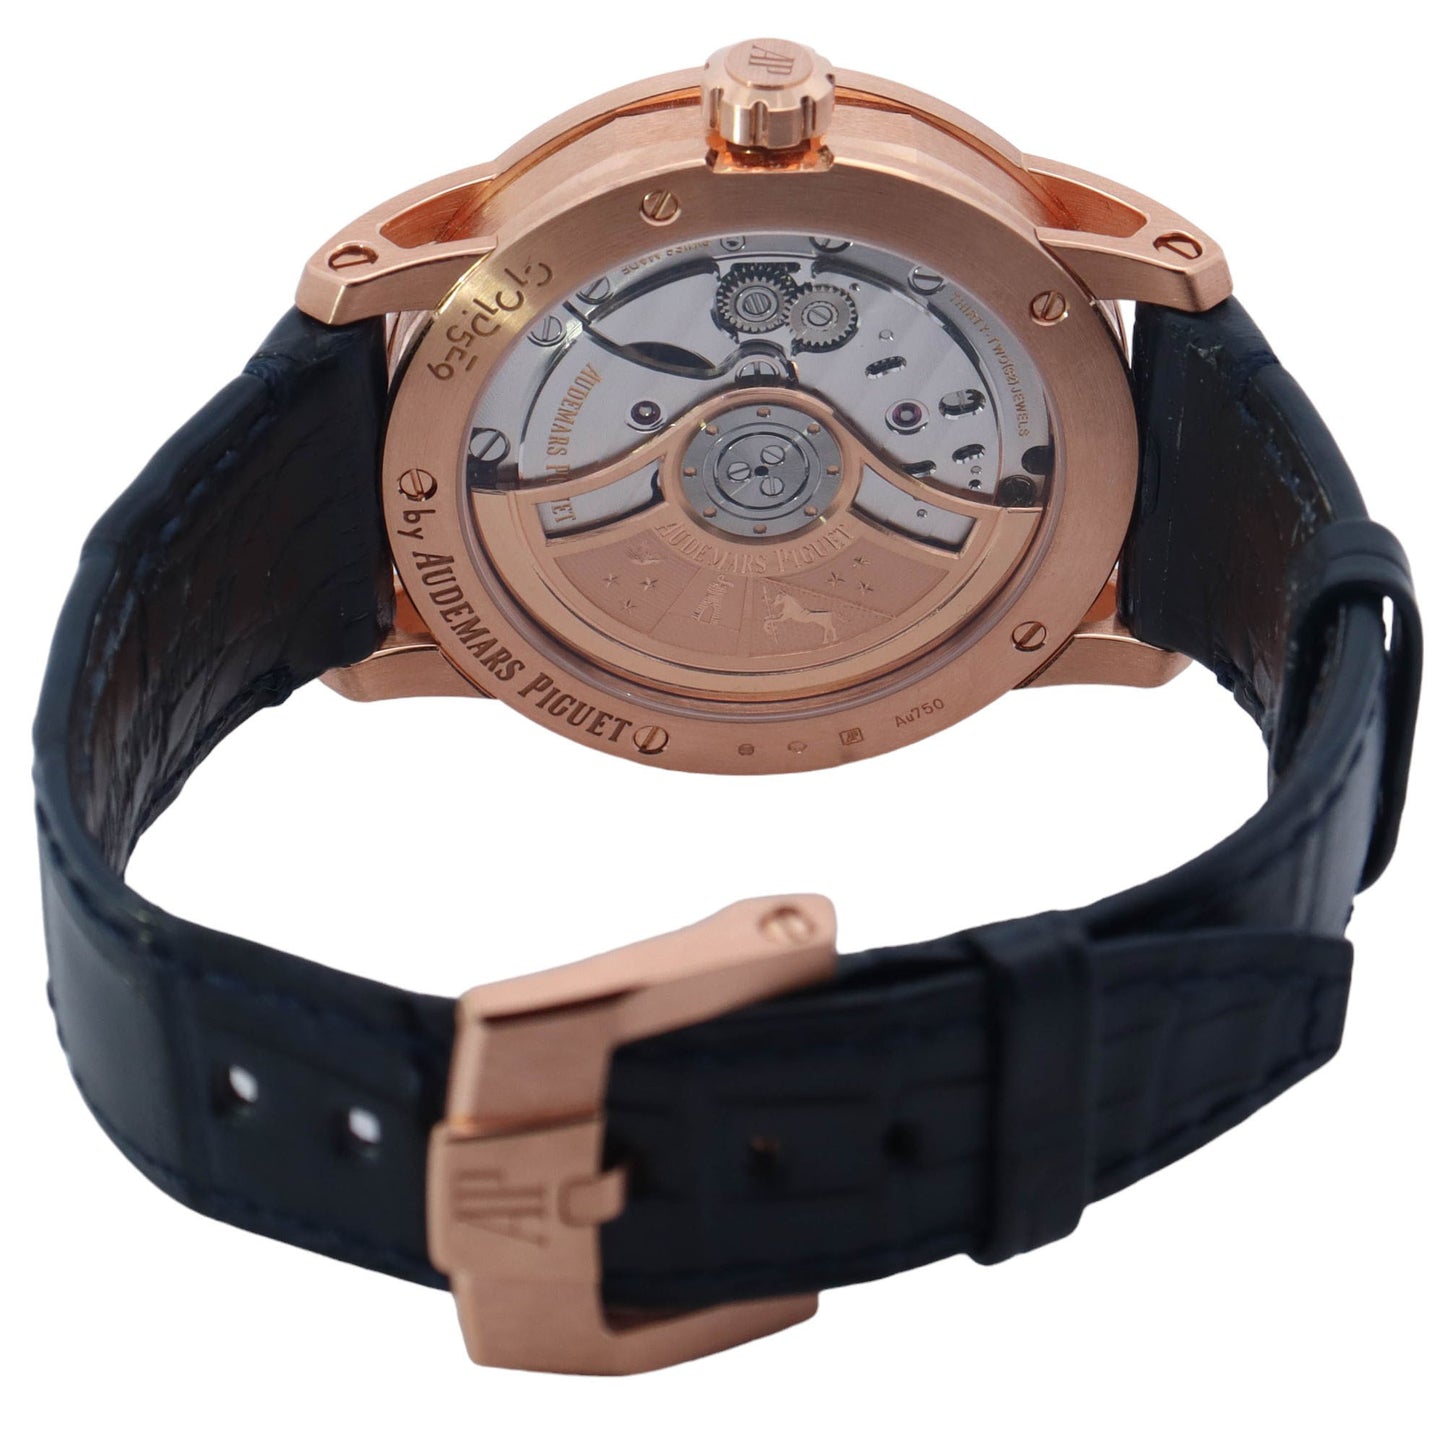 Audemars Piguet Code 11.59 Rose Gold 41mm Blue Arabic & Stick Dial Watch Reference# 15210OR.OO.A002KB.03